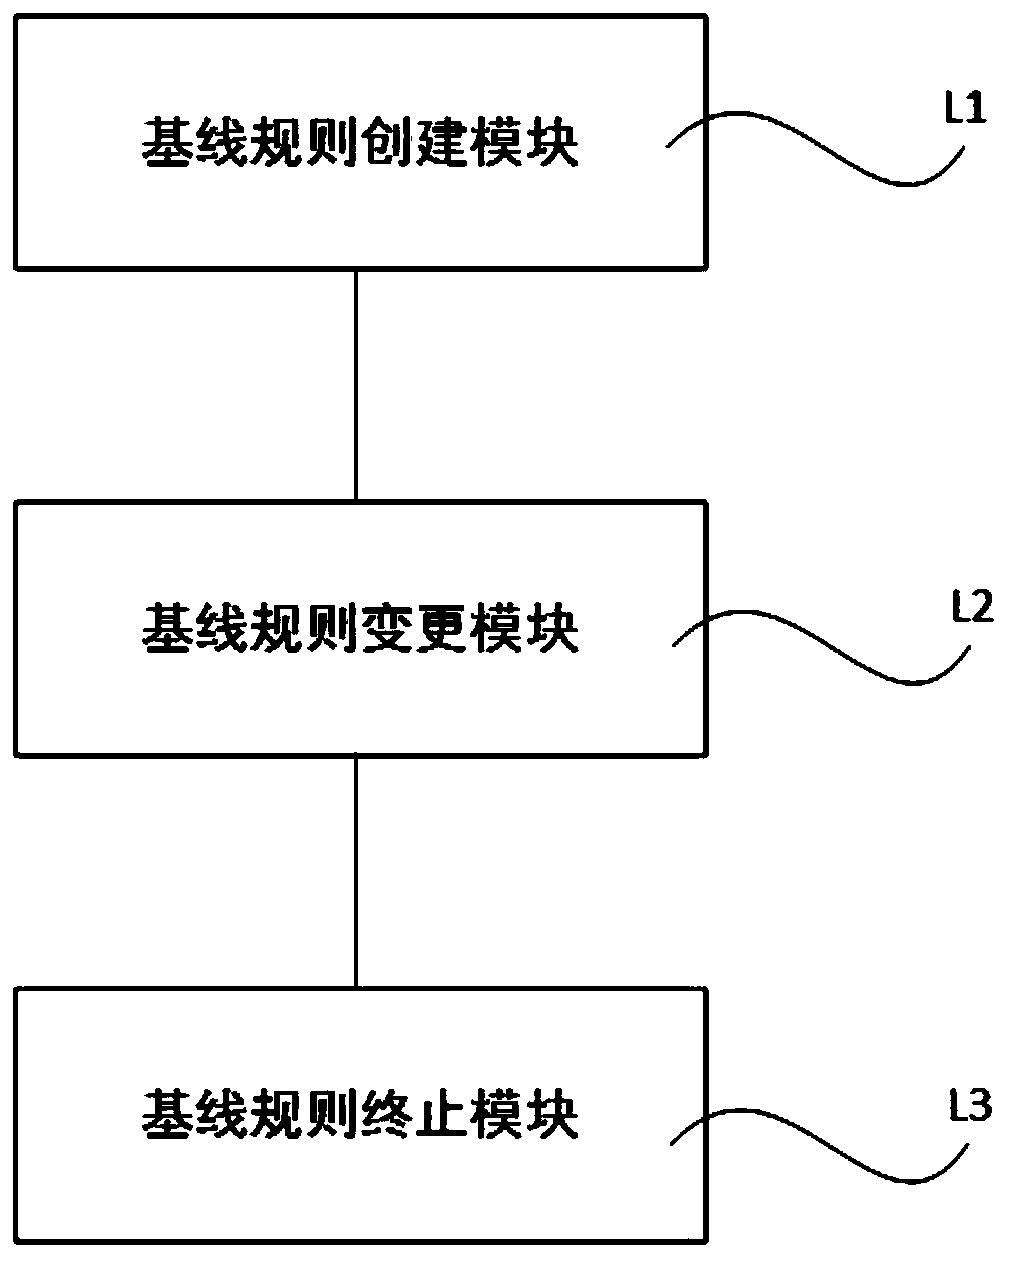 Automatic baseline inspection method based on terminal equipment